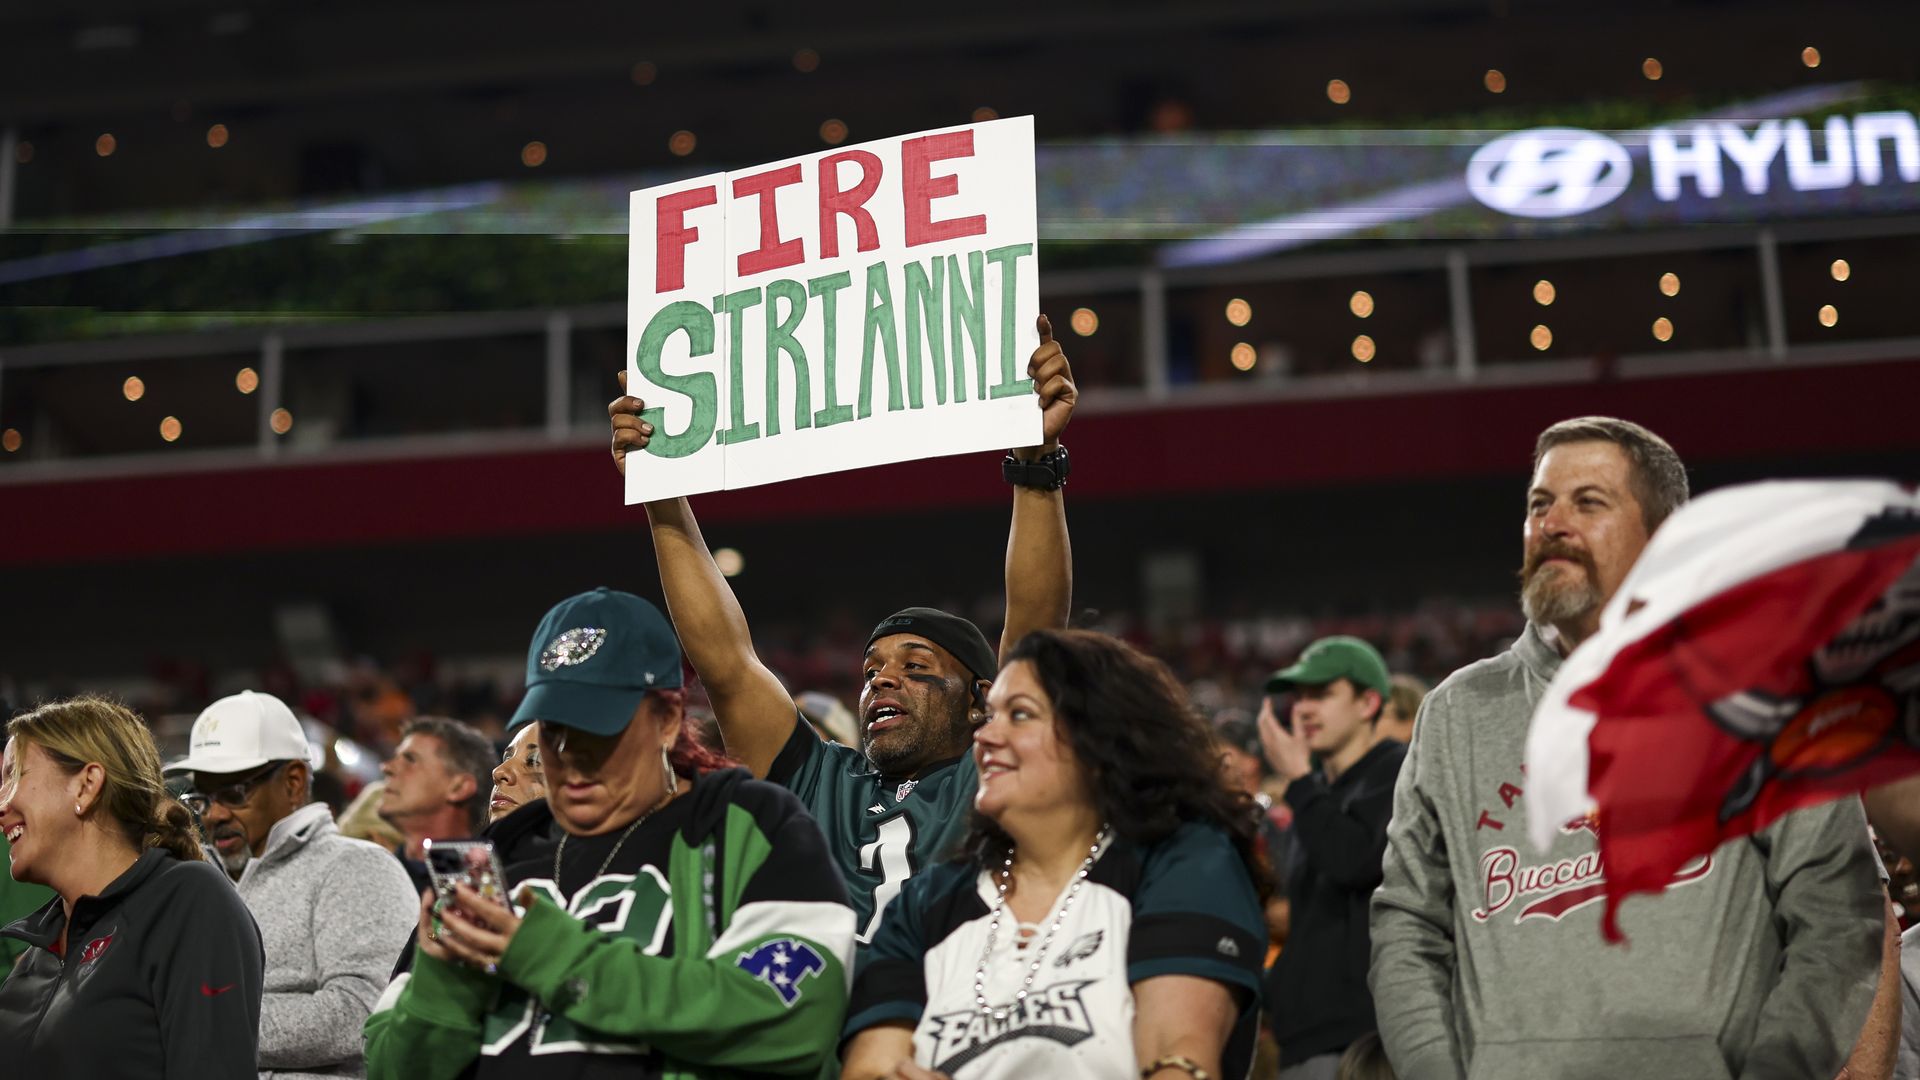 A Philadelphia Eagles fan holds up a sign reading "Fire Sirianni" during the Eagles' playoff loss.